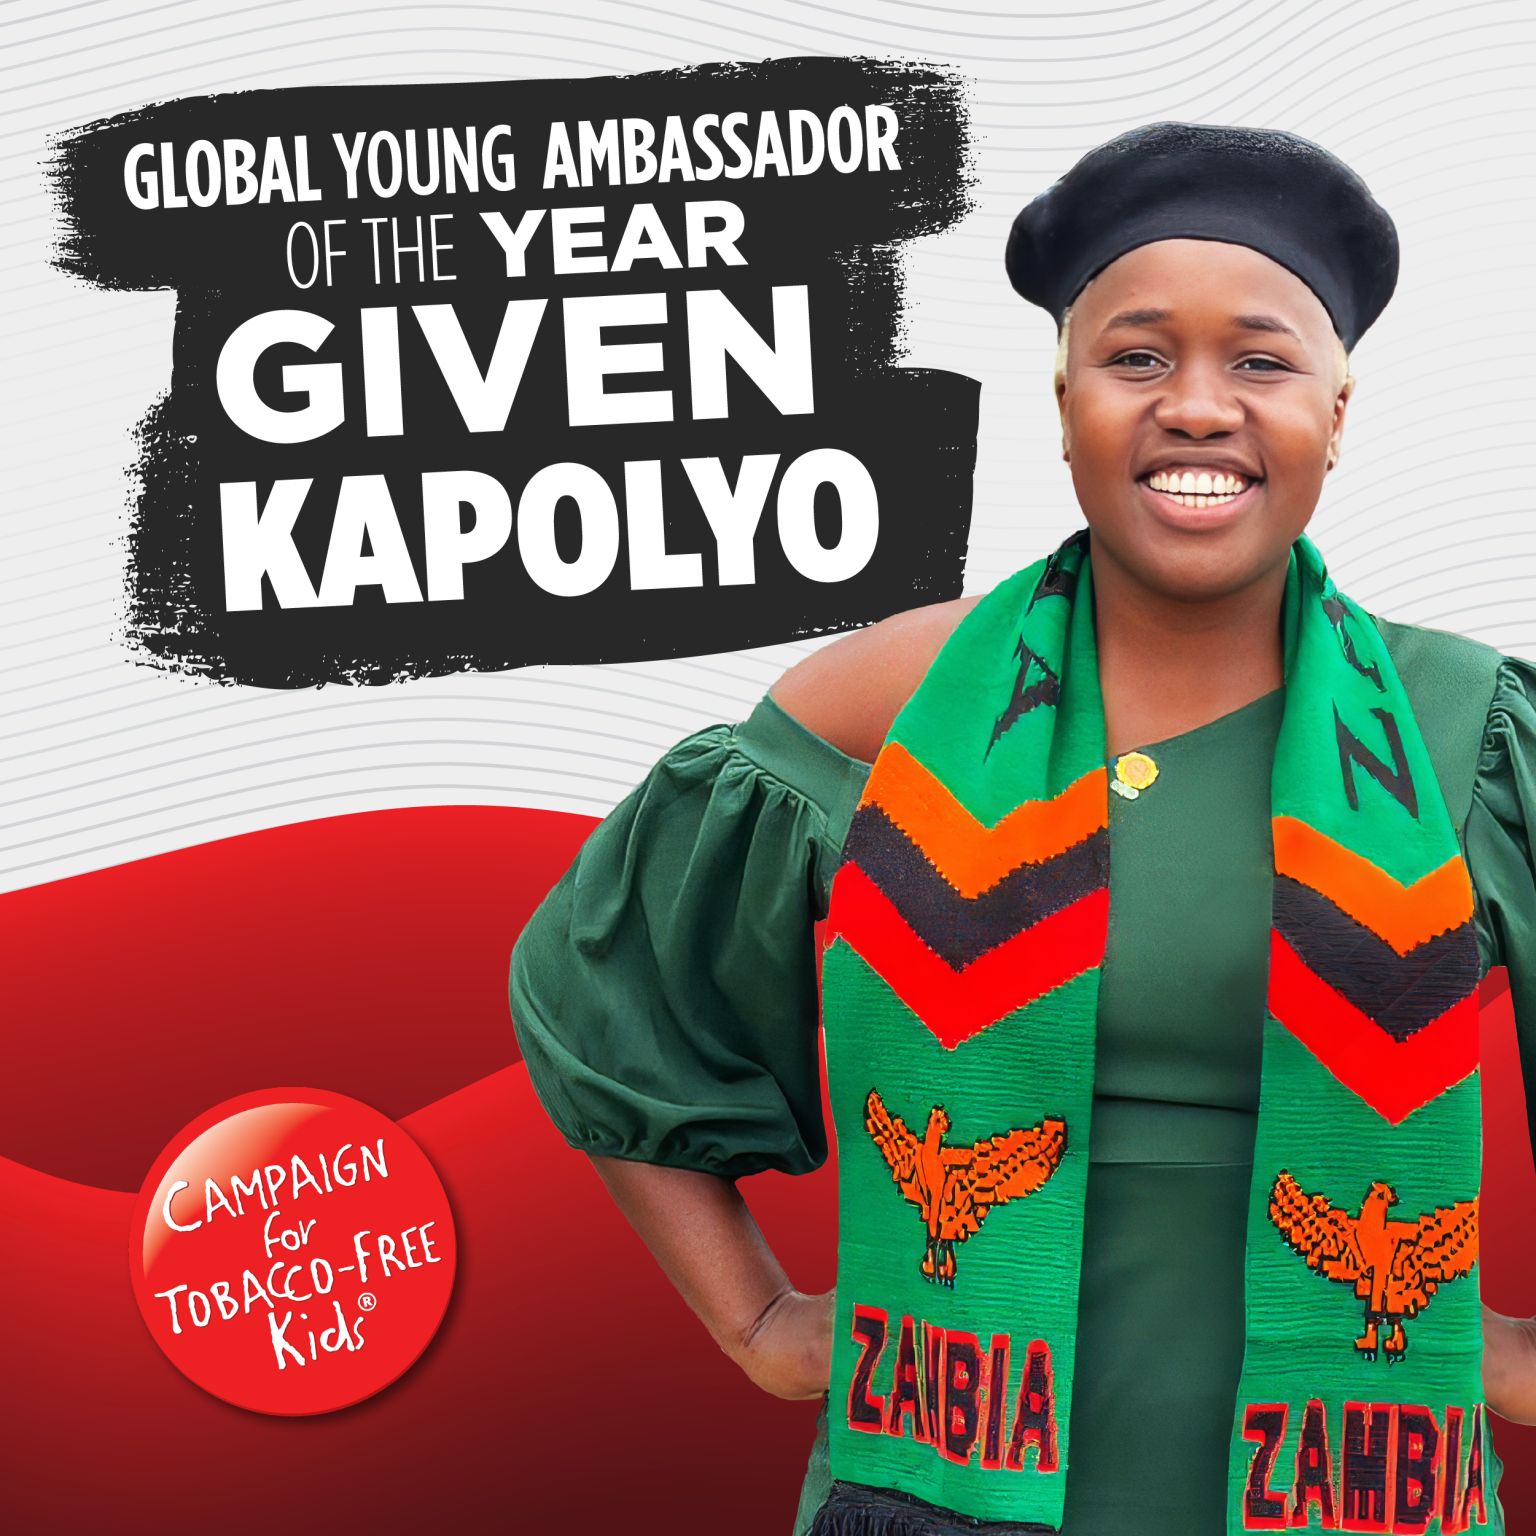 Campaign for Tobacco-Free Kids to Honor Given Kapolyo of Zambia with First-Ever Global Young Ambassador of the Year Award.